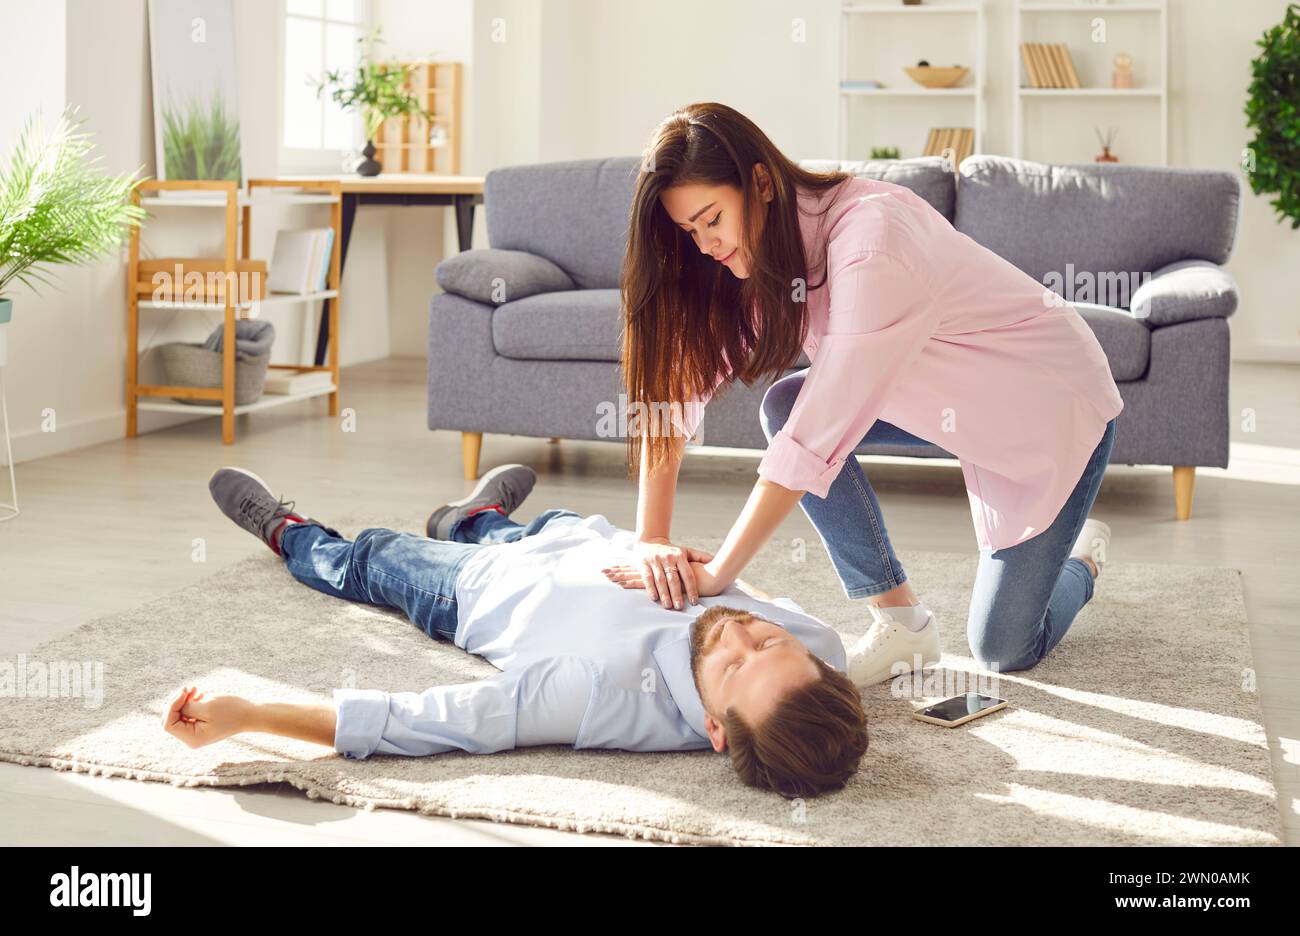 Young woman doing CPR on unconscious man lying on the floor at home. Stock Photo